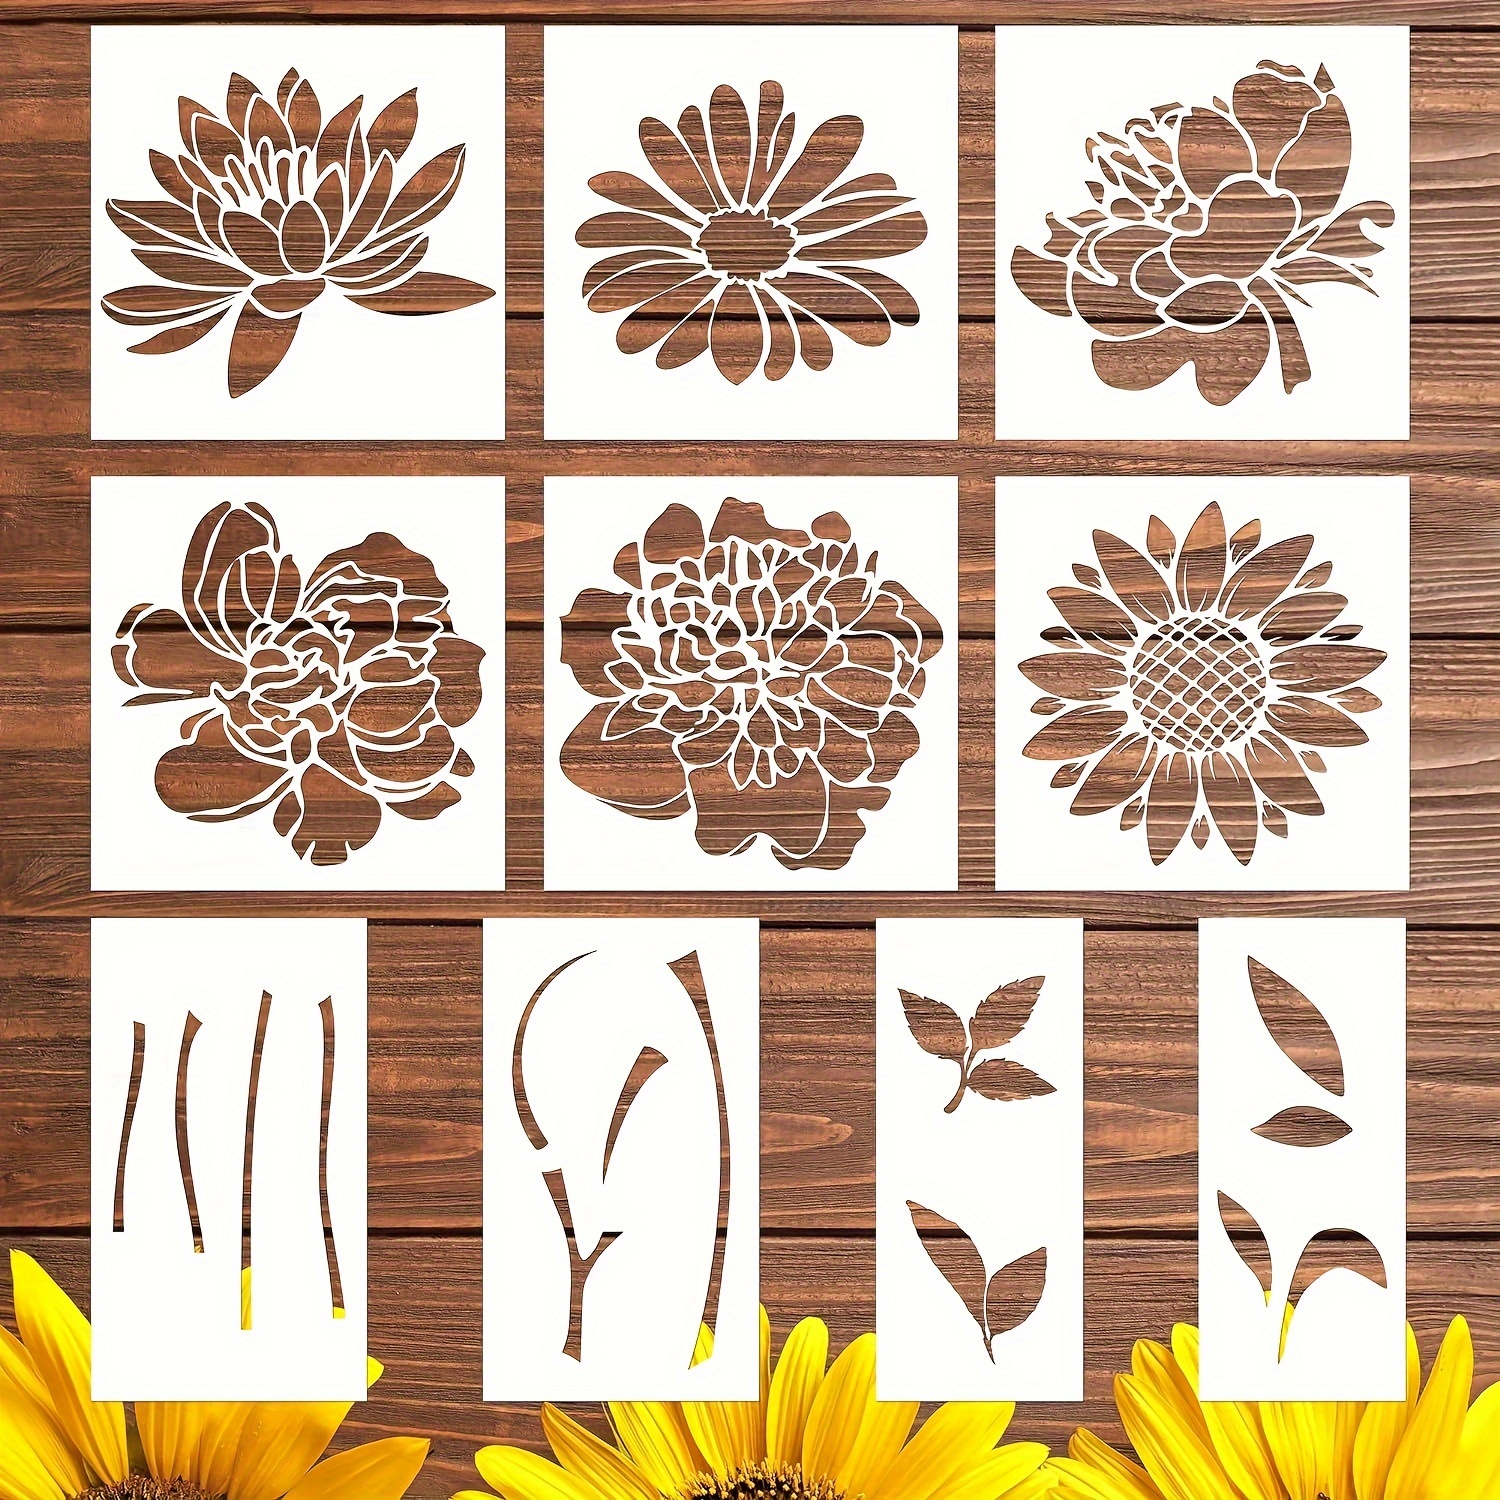 

Large Flower Stencils, 10pcs Reusable Flower Stencils For Painting On Wood, Sunflower Peony Flower Stencils For Painting On Wood Garden Fence Wall Decor, Flower Templates For Painting